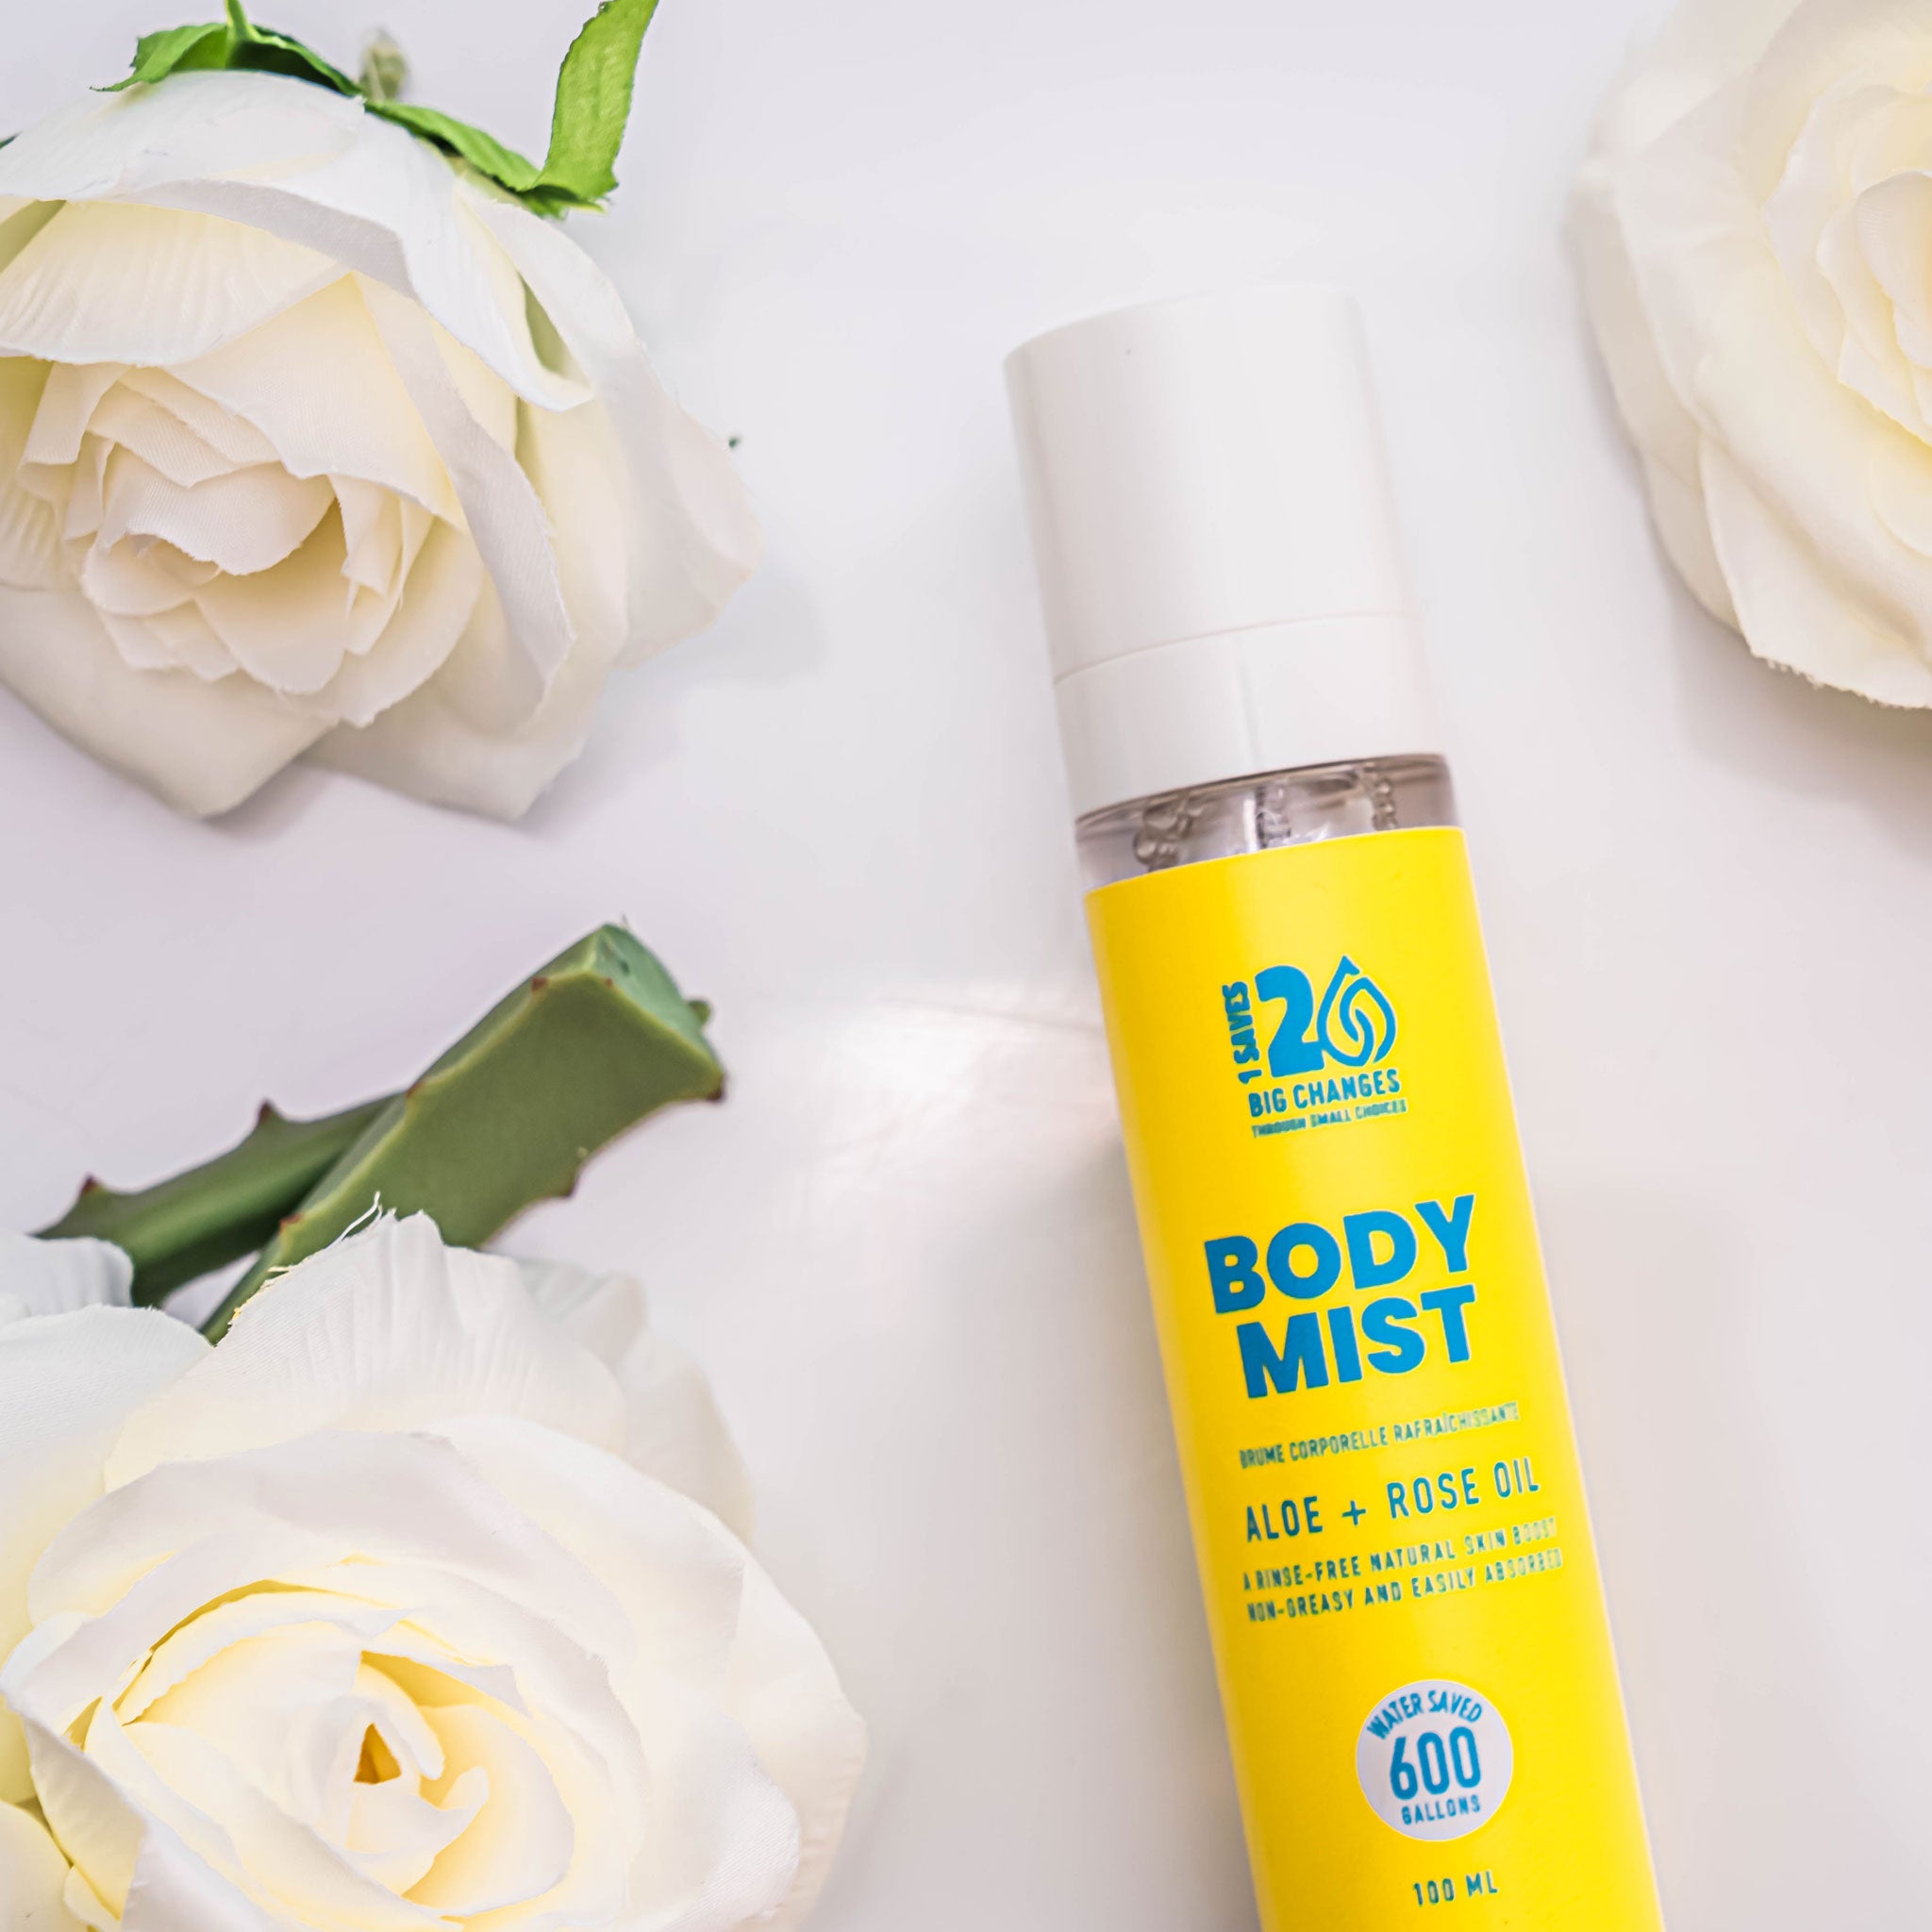 The Refresh Body Collection